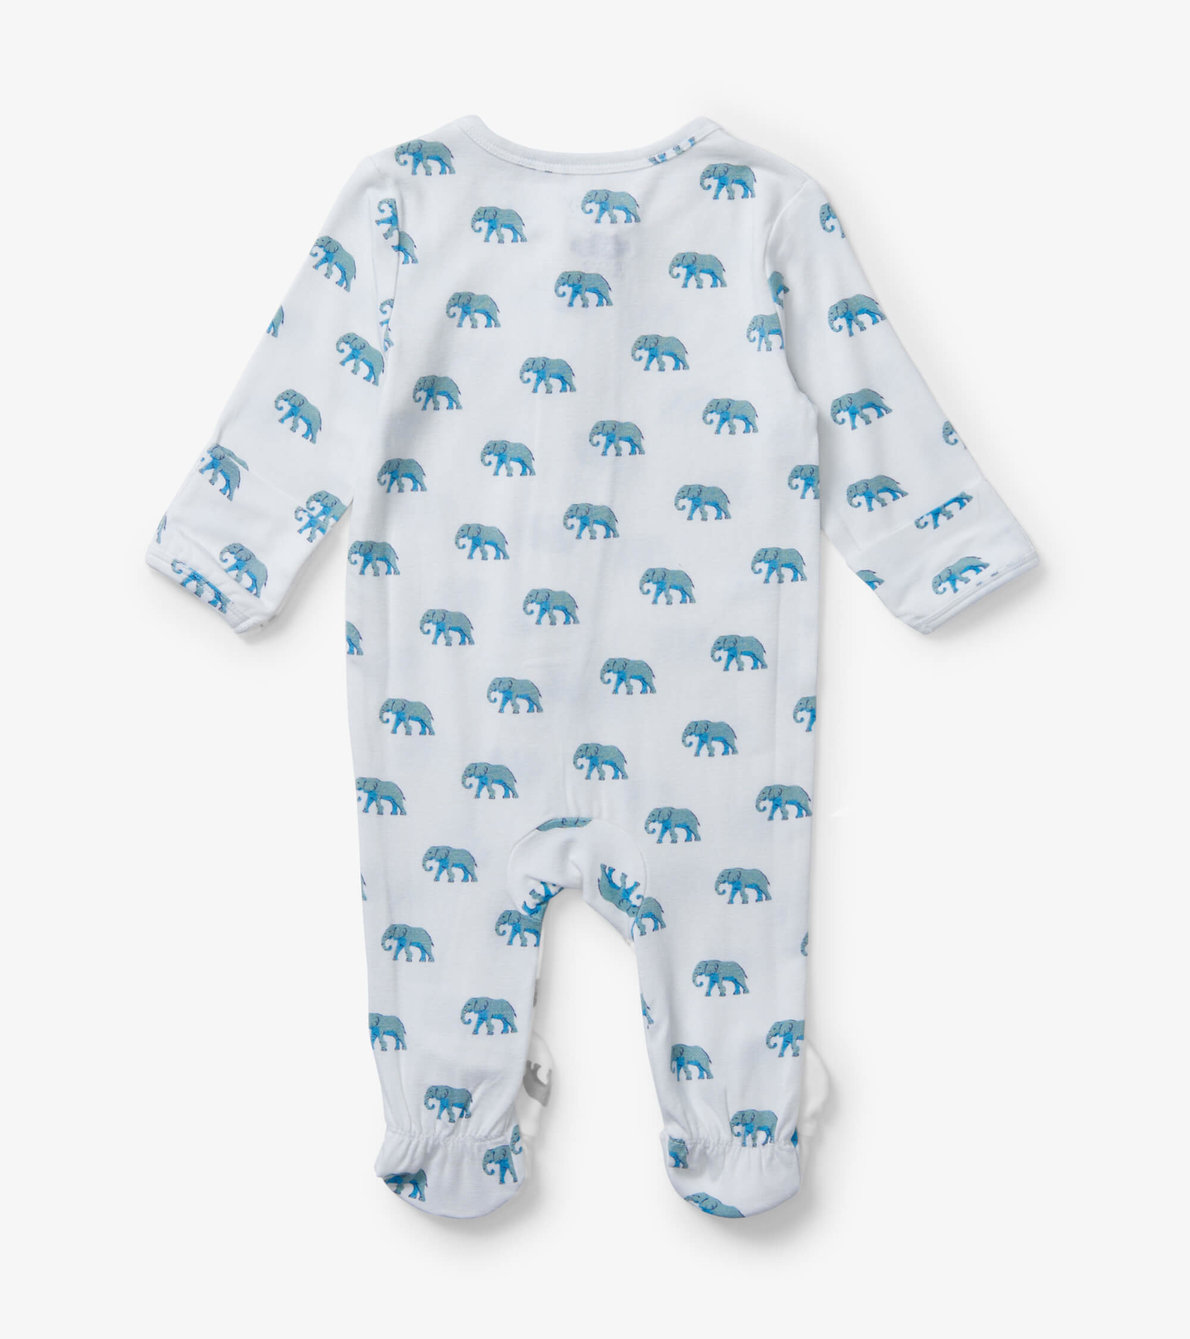 View larger image of Painted Elephants Baby Footed Sleeper